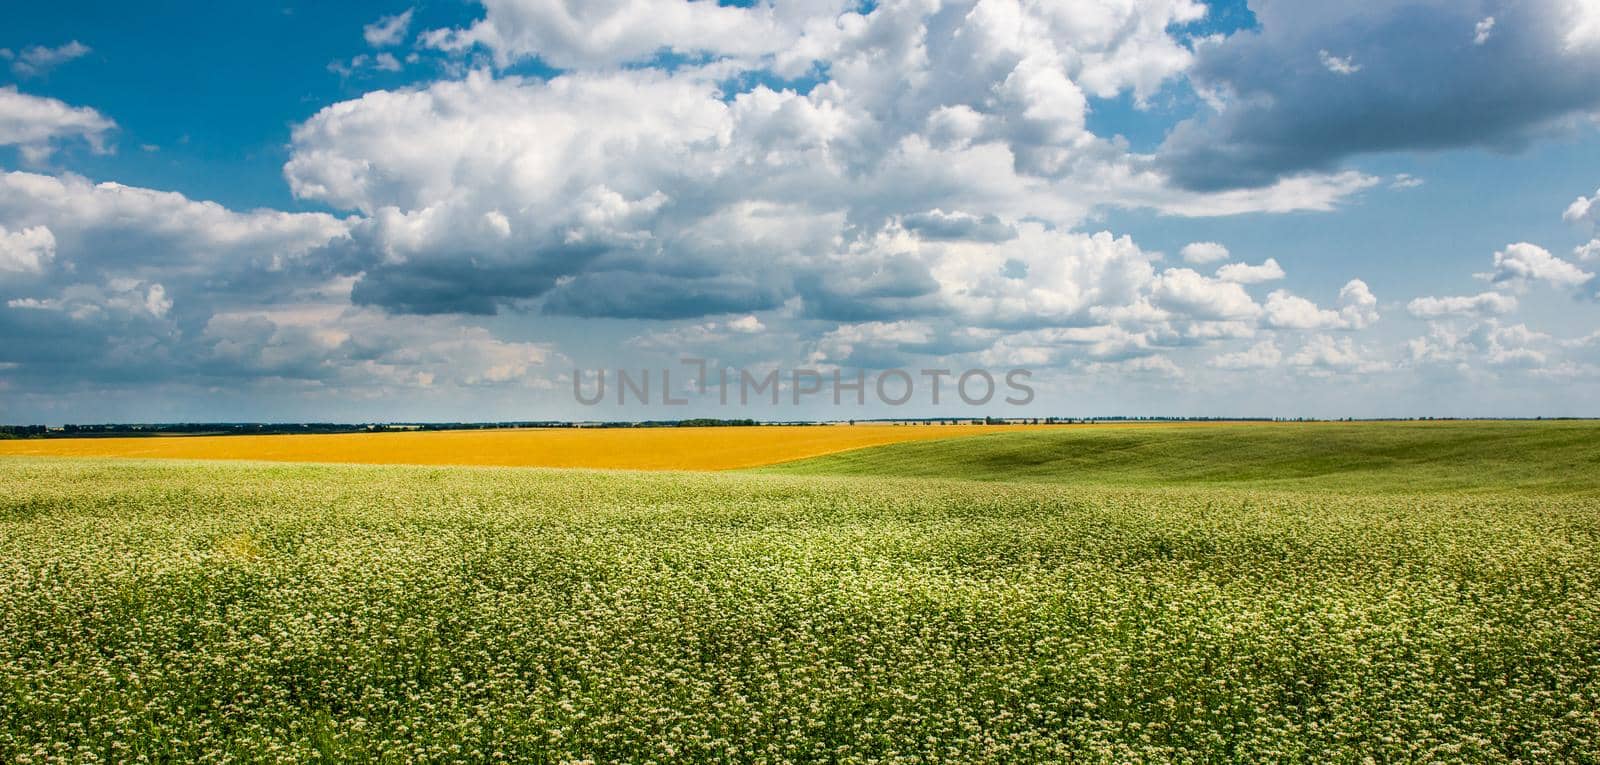 Yellow-green field under the beautiful clouds